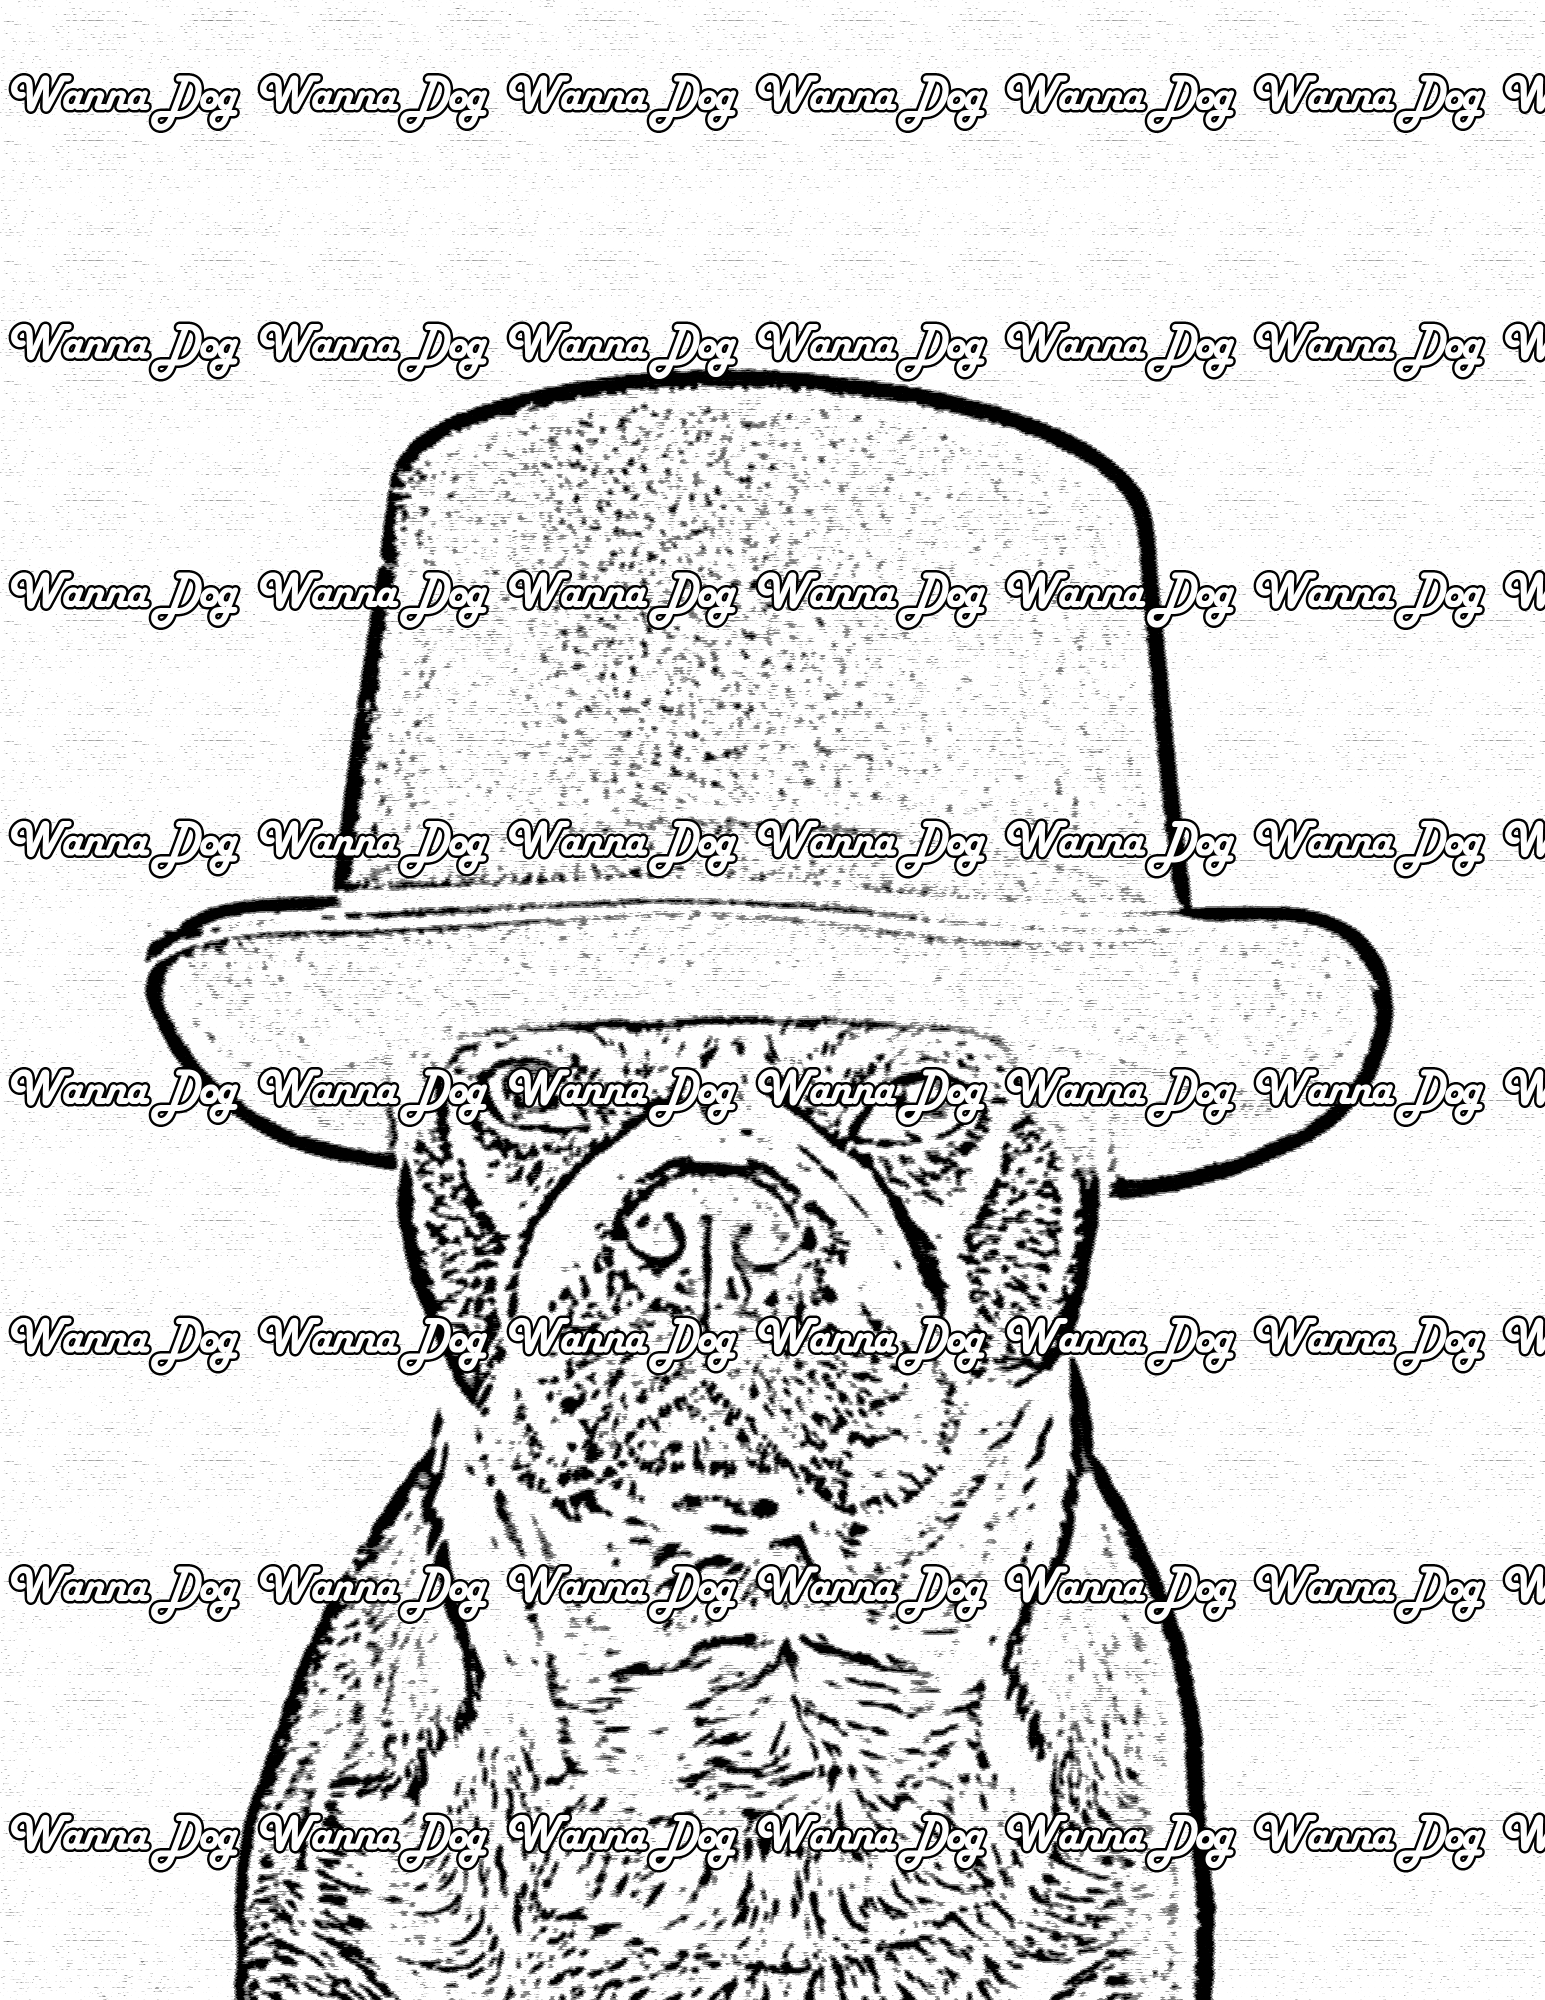 Boston Terrier Coloring Page of a Boston Terrier wearing a top hat